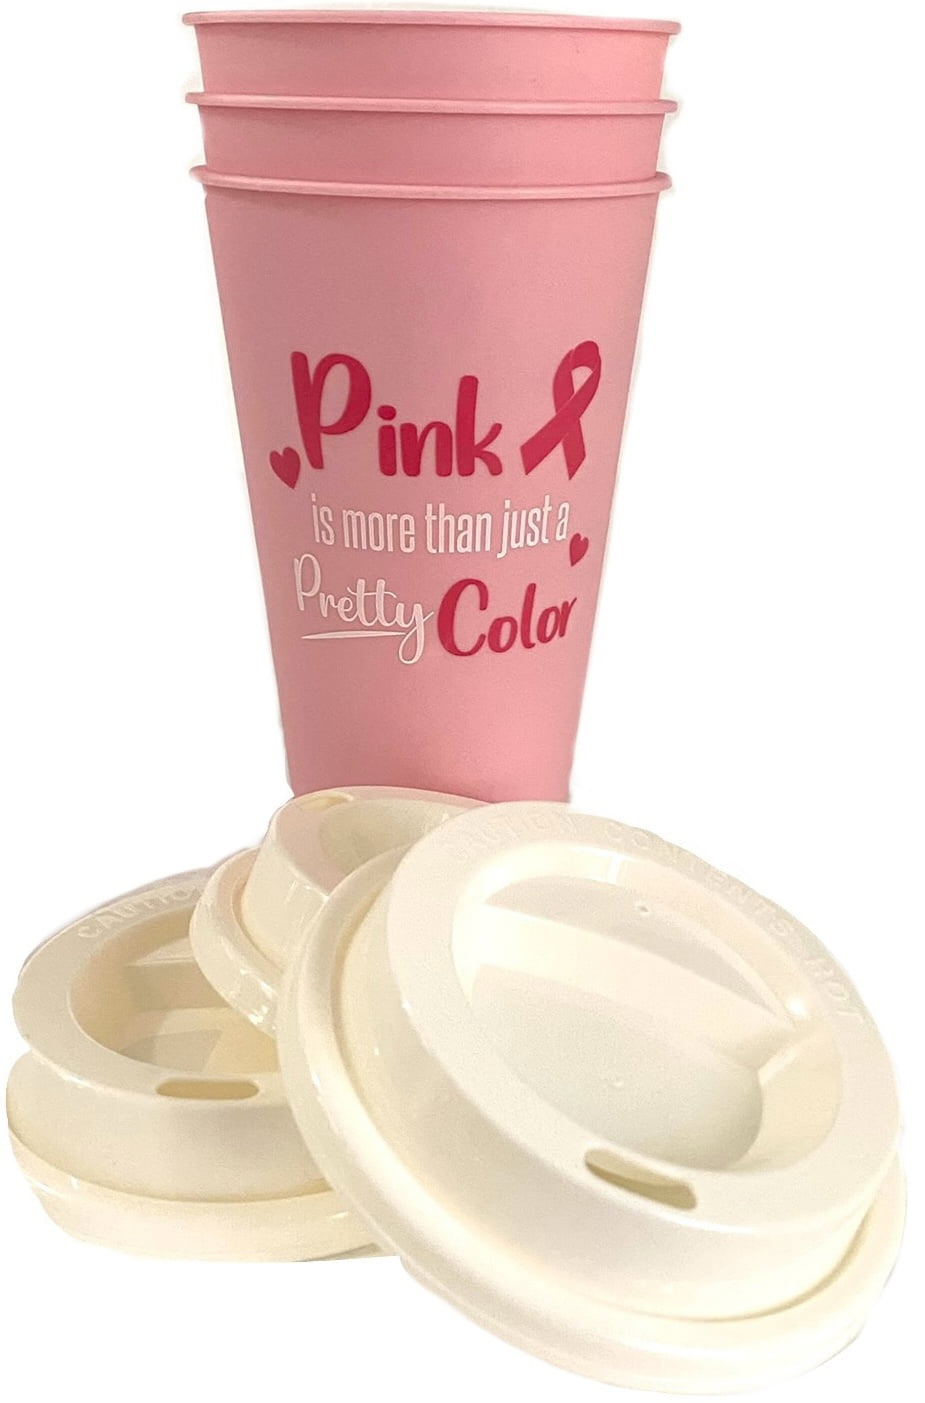 Tumbler Cups With Lids -  Pink is more than just a Pretty Color  Ribbon  Breast Cancer Awareness Reusable 3 Pack Cup Set